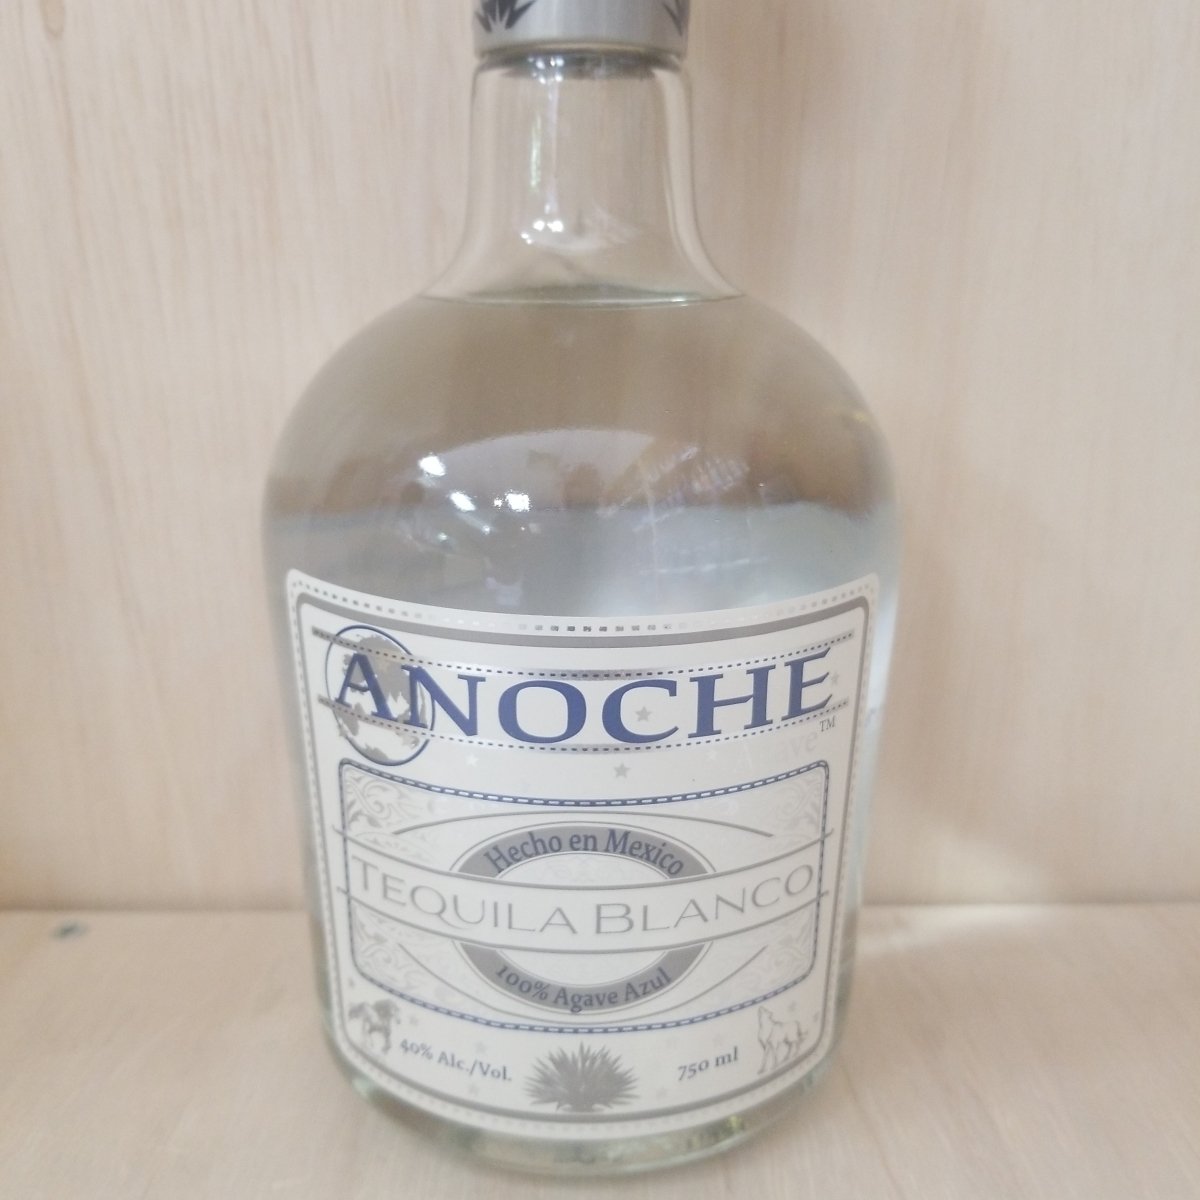 Anoche Blanco Tequila 750ml (Kosher for Passover) - Sip & Say